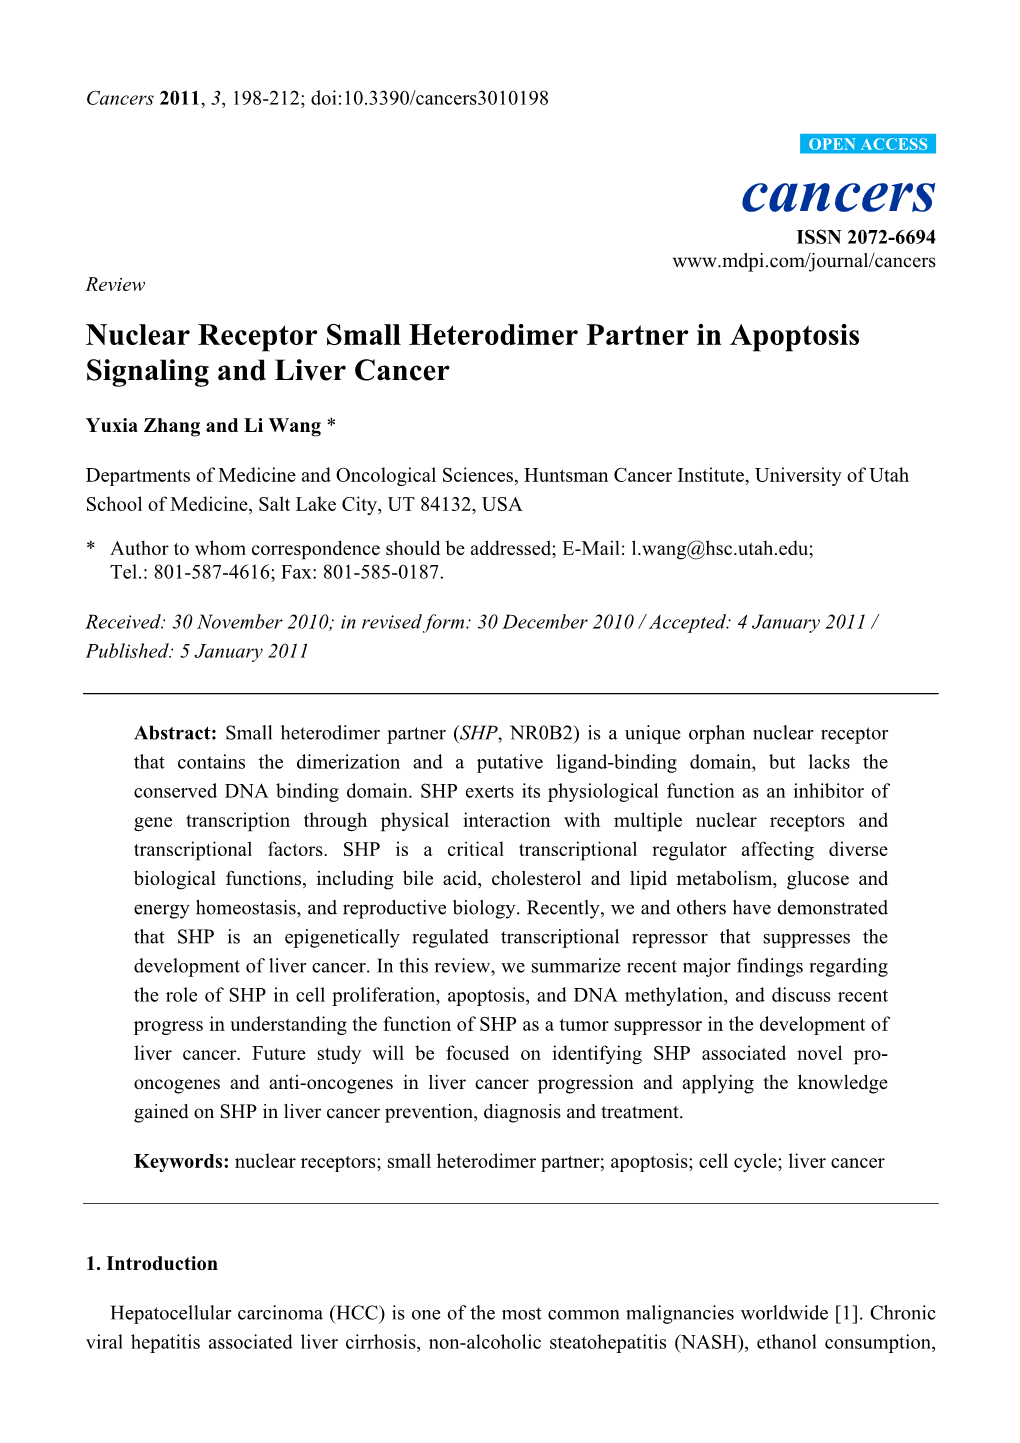 Nuclear Receptor Small Heterodimer Partner in Apoptosis Signaling and Liver Cancer